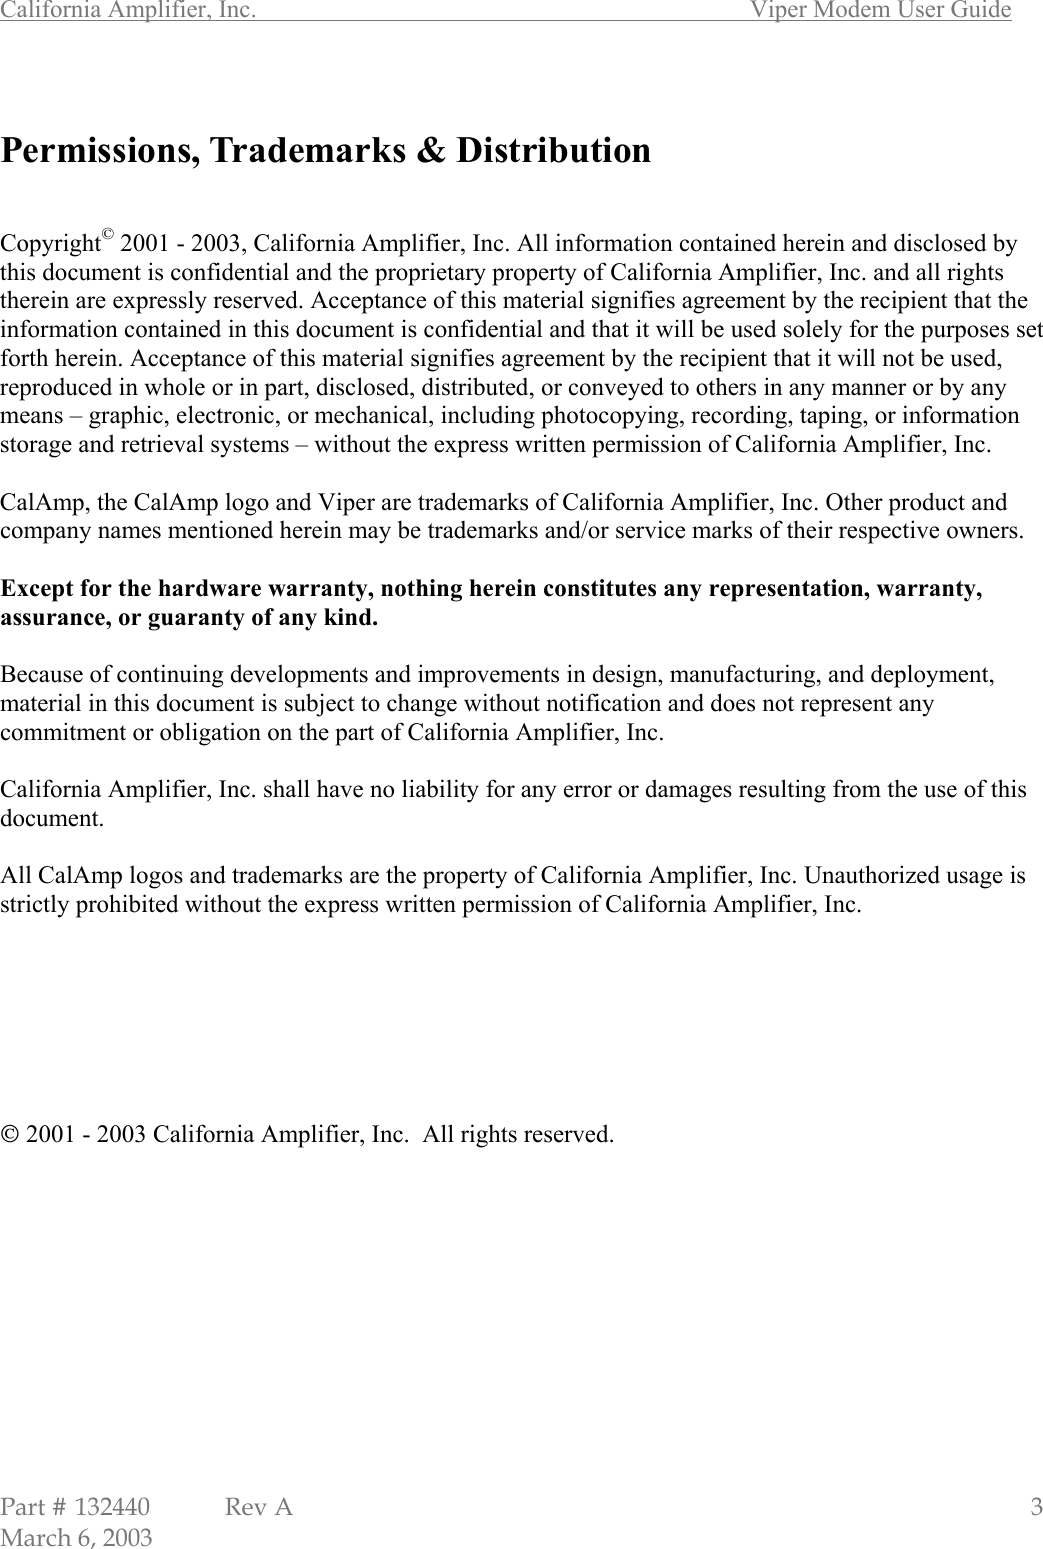 California Amplifier, Inc.       Viper Modem User Guide Part # 132440  Rev A                                                   3 March 6, 2003  Permissions, Trademarks &amp; Distribution   Copyright© 2001 - 2003, California Amplifier, Inc. All information contained herein and disclosed by this document is confidential and the proprietary property of California Amplifier, Inc. and all rights therein are expressly reserved. Acceptance of this material signifies agreement by the recipient that the information contained in this document is confidential and that it will be used solely for the purposes set forth herein. Acceptance of this material signifies agreement by the recipient that it will not be used, reproduced in whole or in part, disclosed, distributed, or conveyed to others in any manner or by any means – graphic, electronic, or mechanical, including photocopying, recording, taping, or information storage and retrieval systems – without the express written permission of California Amplifier, Inc.  CalAmp, the CalAmp logo and Viper are trademarks of California Amplifier, Inc. Other product and company names mentioned herein may be trademarks and/or service marks of their respective owners.  Except for the hardware warranty, nothing herein constitutes any representation, warranty, assurance, or guaranty of any kind.  Because of continuing developments and improvements in design, manufacturing, and deployment, material in this document is subject to change without notification and does not represent any commitment or obligation on the part of California Amplifier, Inc.  California Amplifier, Inc. shall have no liability for any error or damages resulting from the use of this document.  All CalAmp logos and trademarks are the property of California Amplifier, Inc. Unauthorized usage is strictly prohibited without the express written permission of California Amplifier, Inc.         2001 - 2003 California Amplifier, Inc.  All rights reserved. 